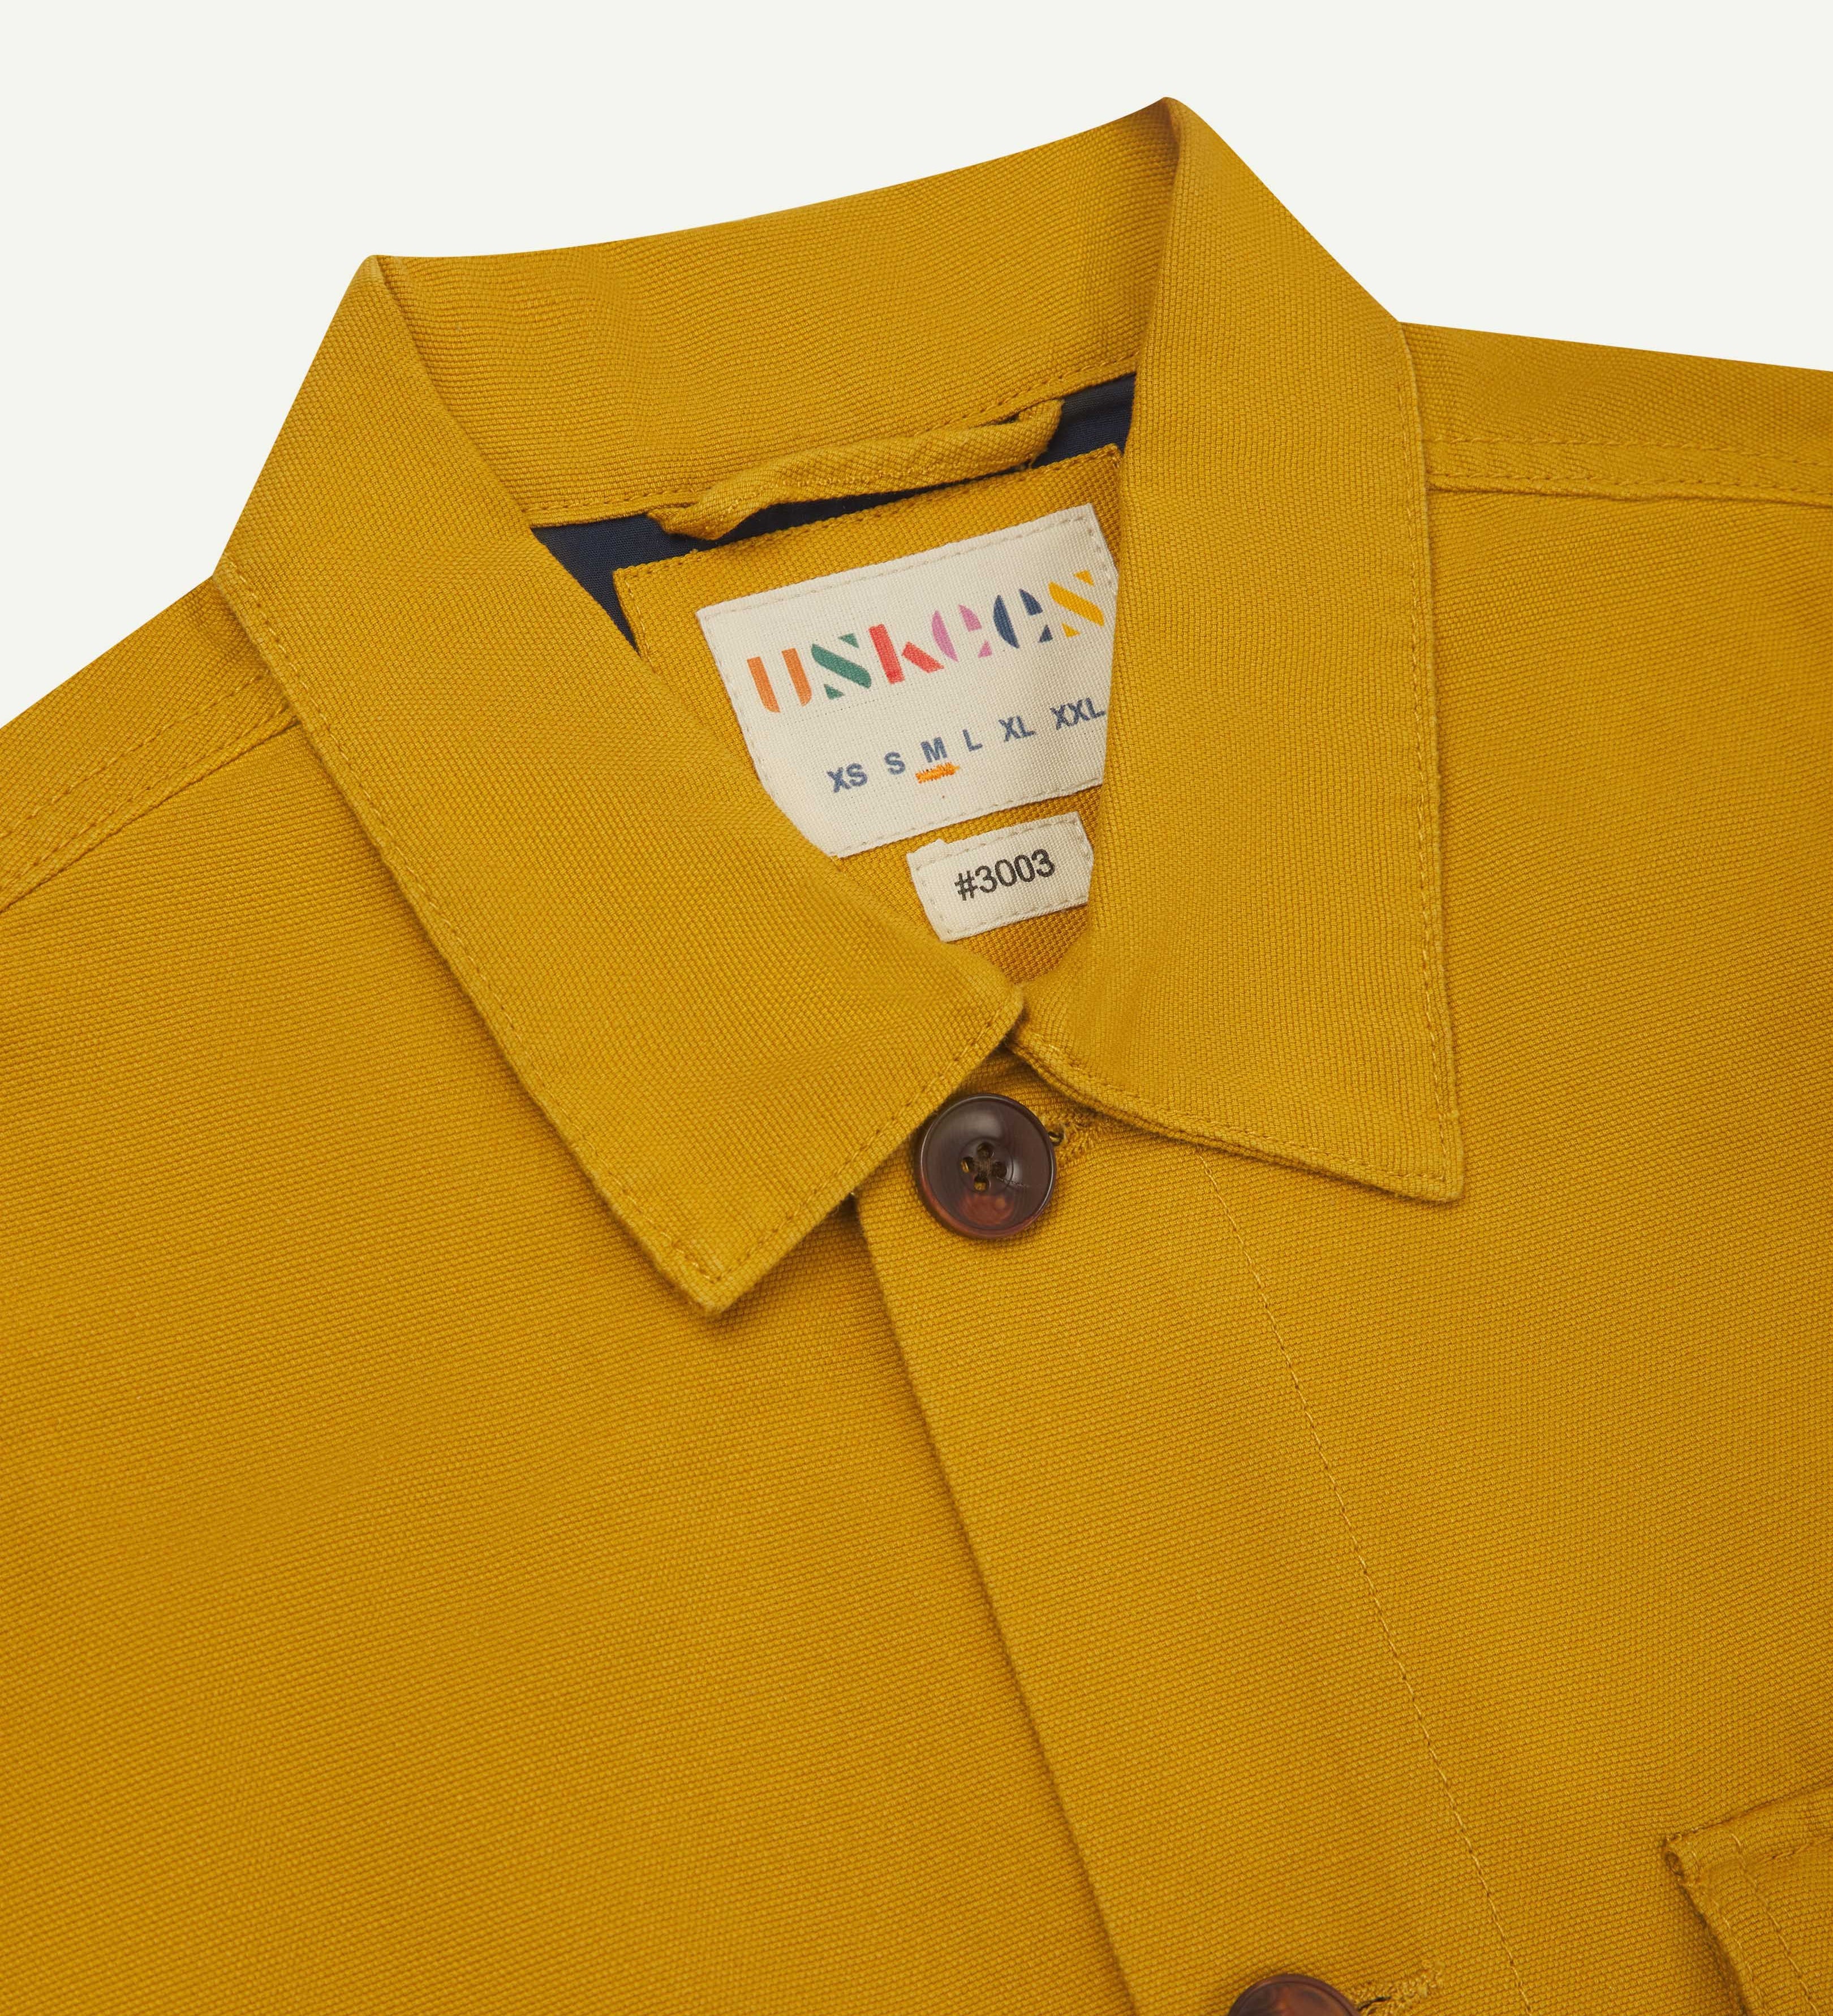 front detail view of uskees bright yellow workshirt for men showing brand label and blue yoke lining